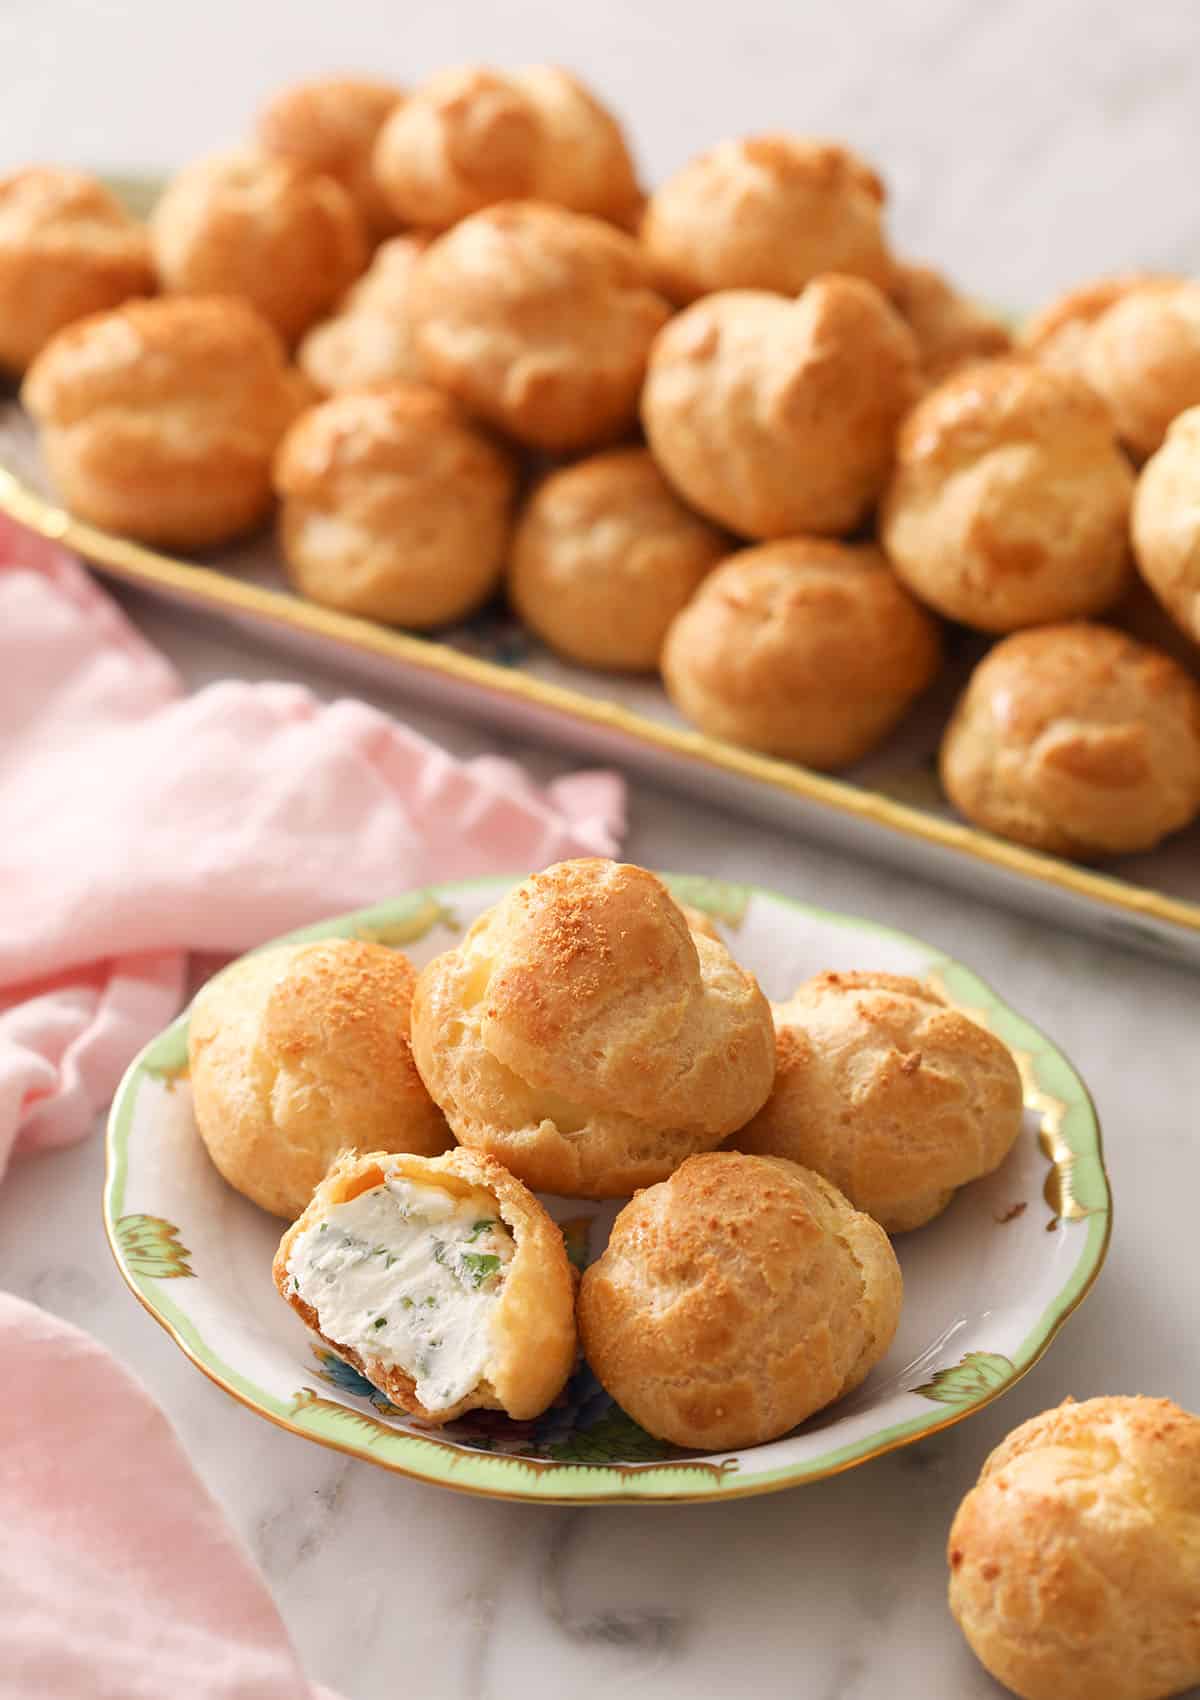 Cheese puffs on a small plate in front of a serving tray full of them